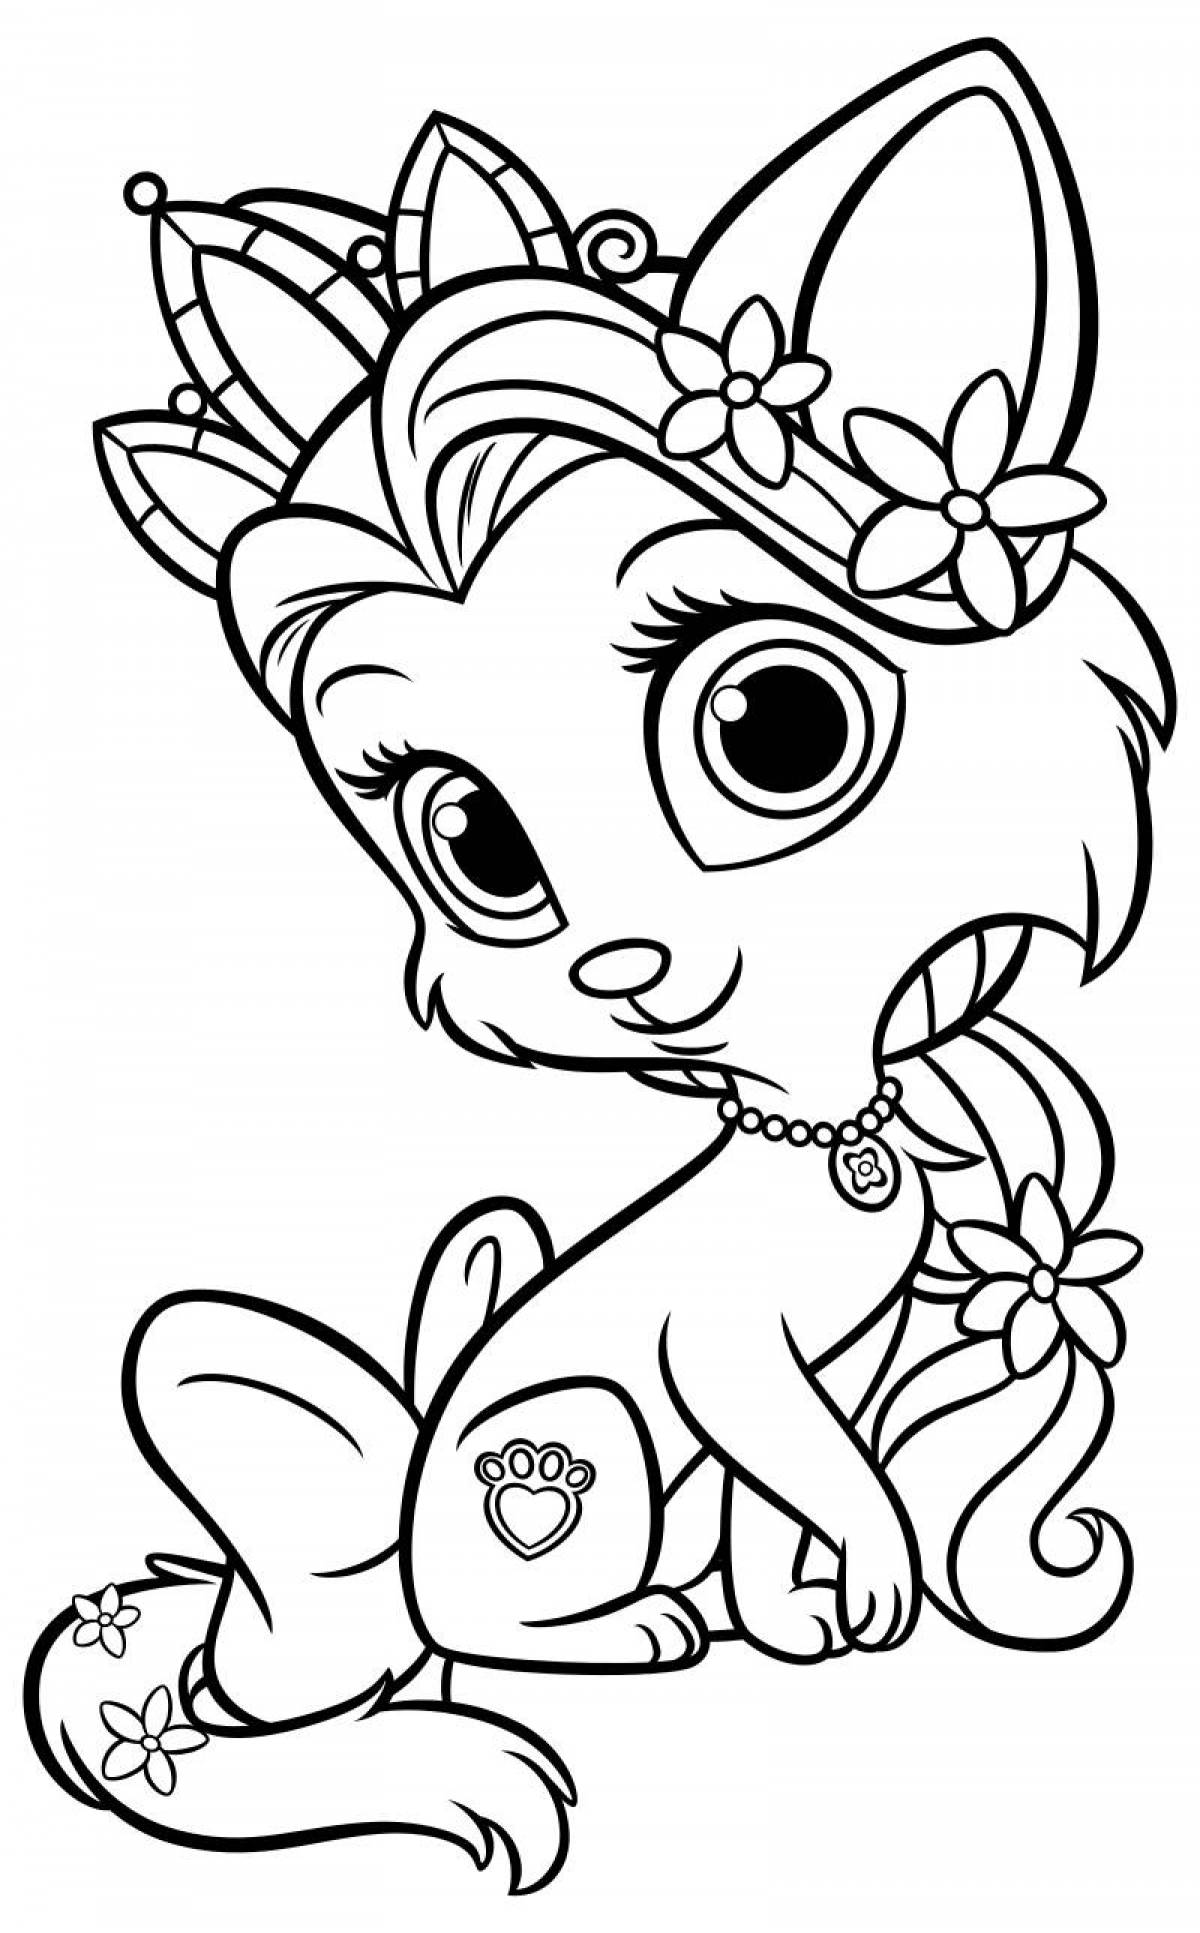 Exquisite coloring book for kitten girls